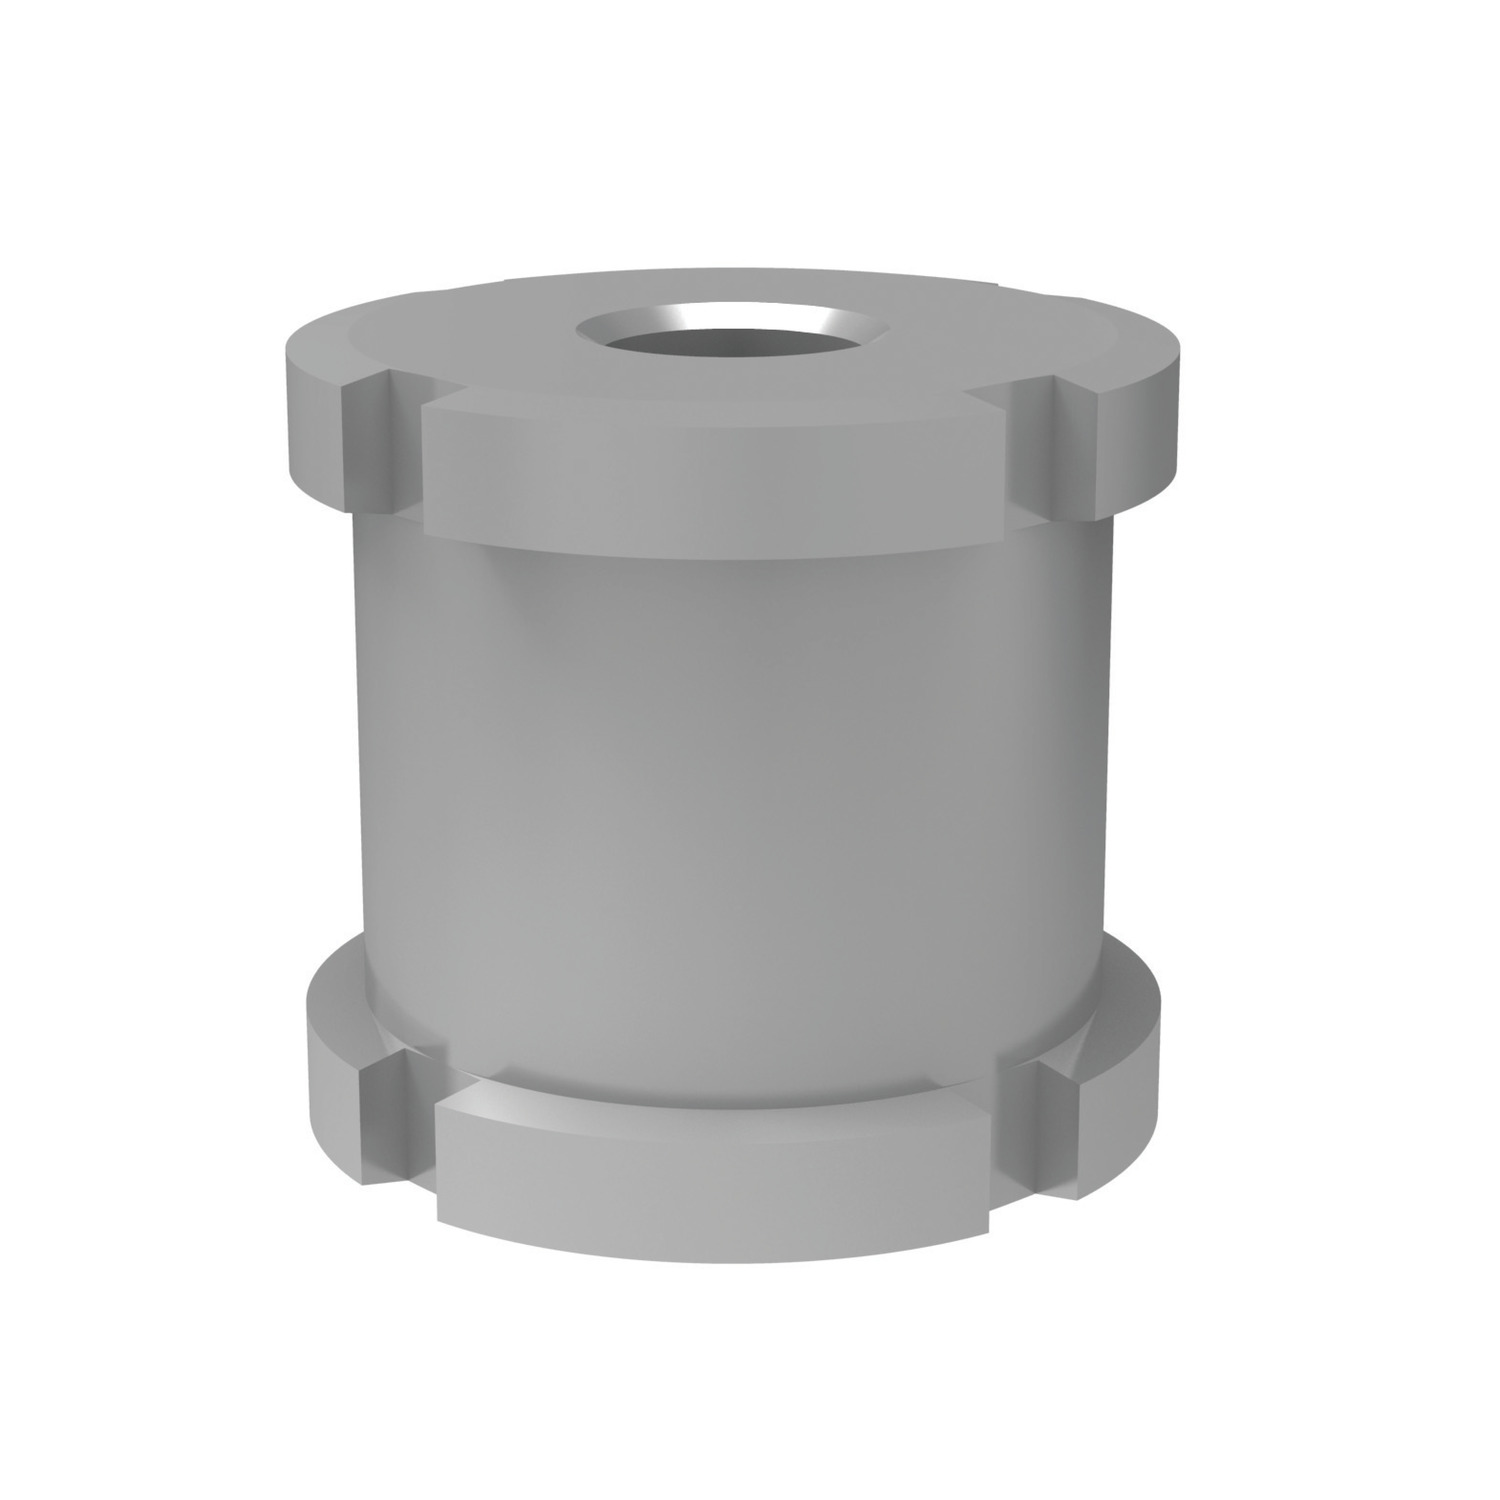 Precision Adjuster Designed for applications where a wide adjustment range is required - height adjustment is equal to 15 to 40mm.